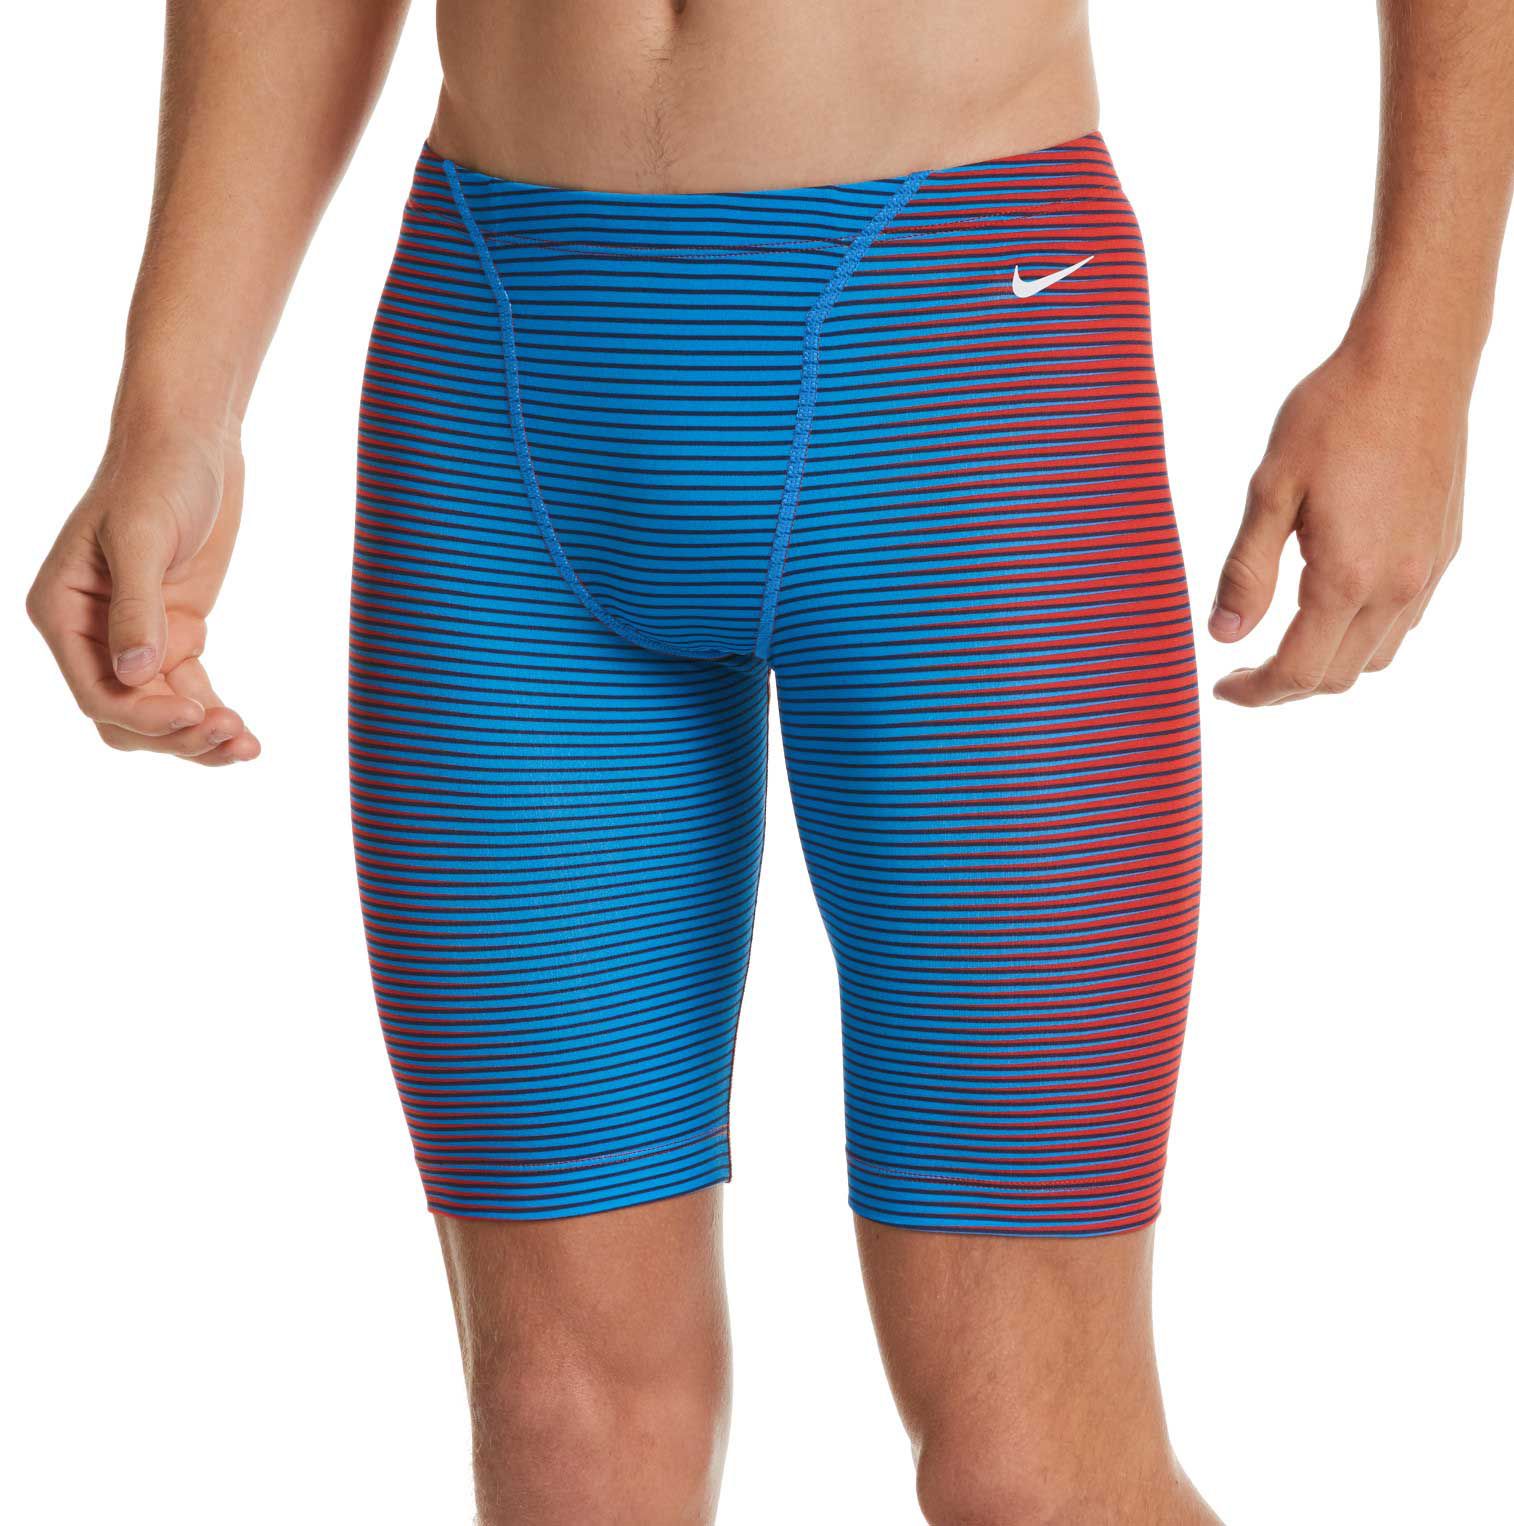 Rally bericht ozon Dick's Sporting Goods Nike Men's Hydrastrong Charge Jammer Swimsuit |  Bridge Street Town Centre